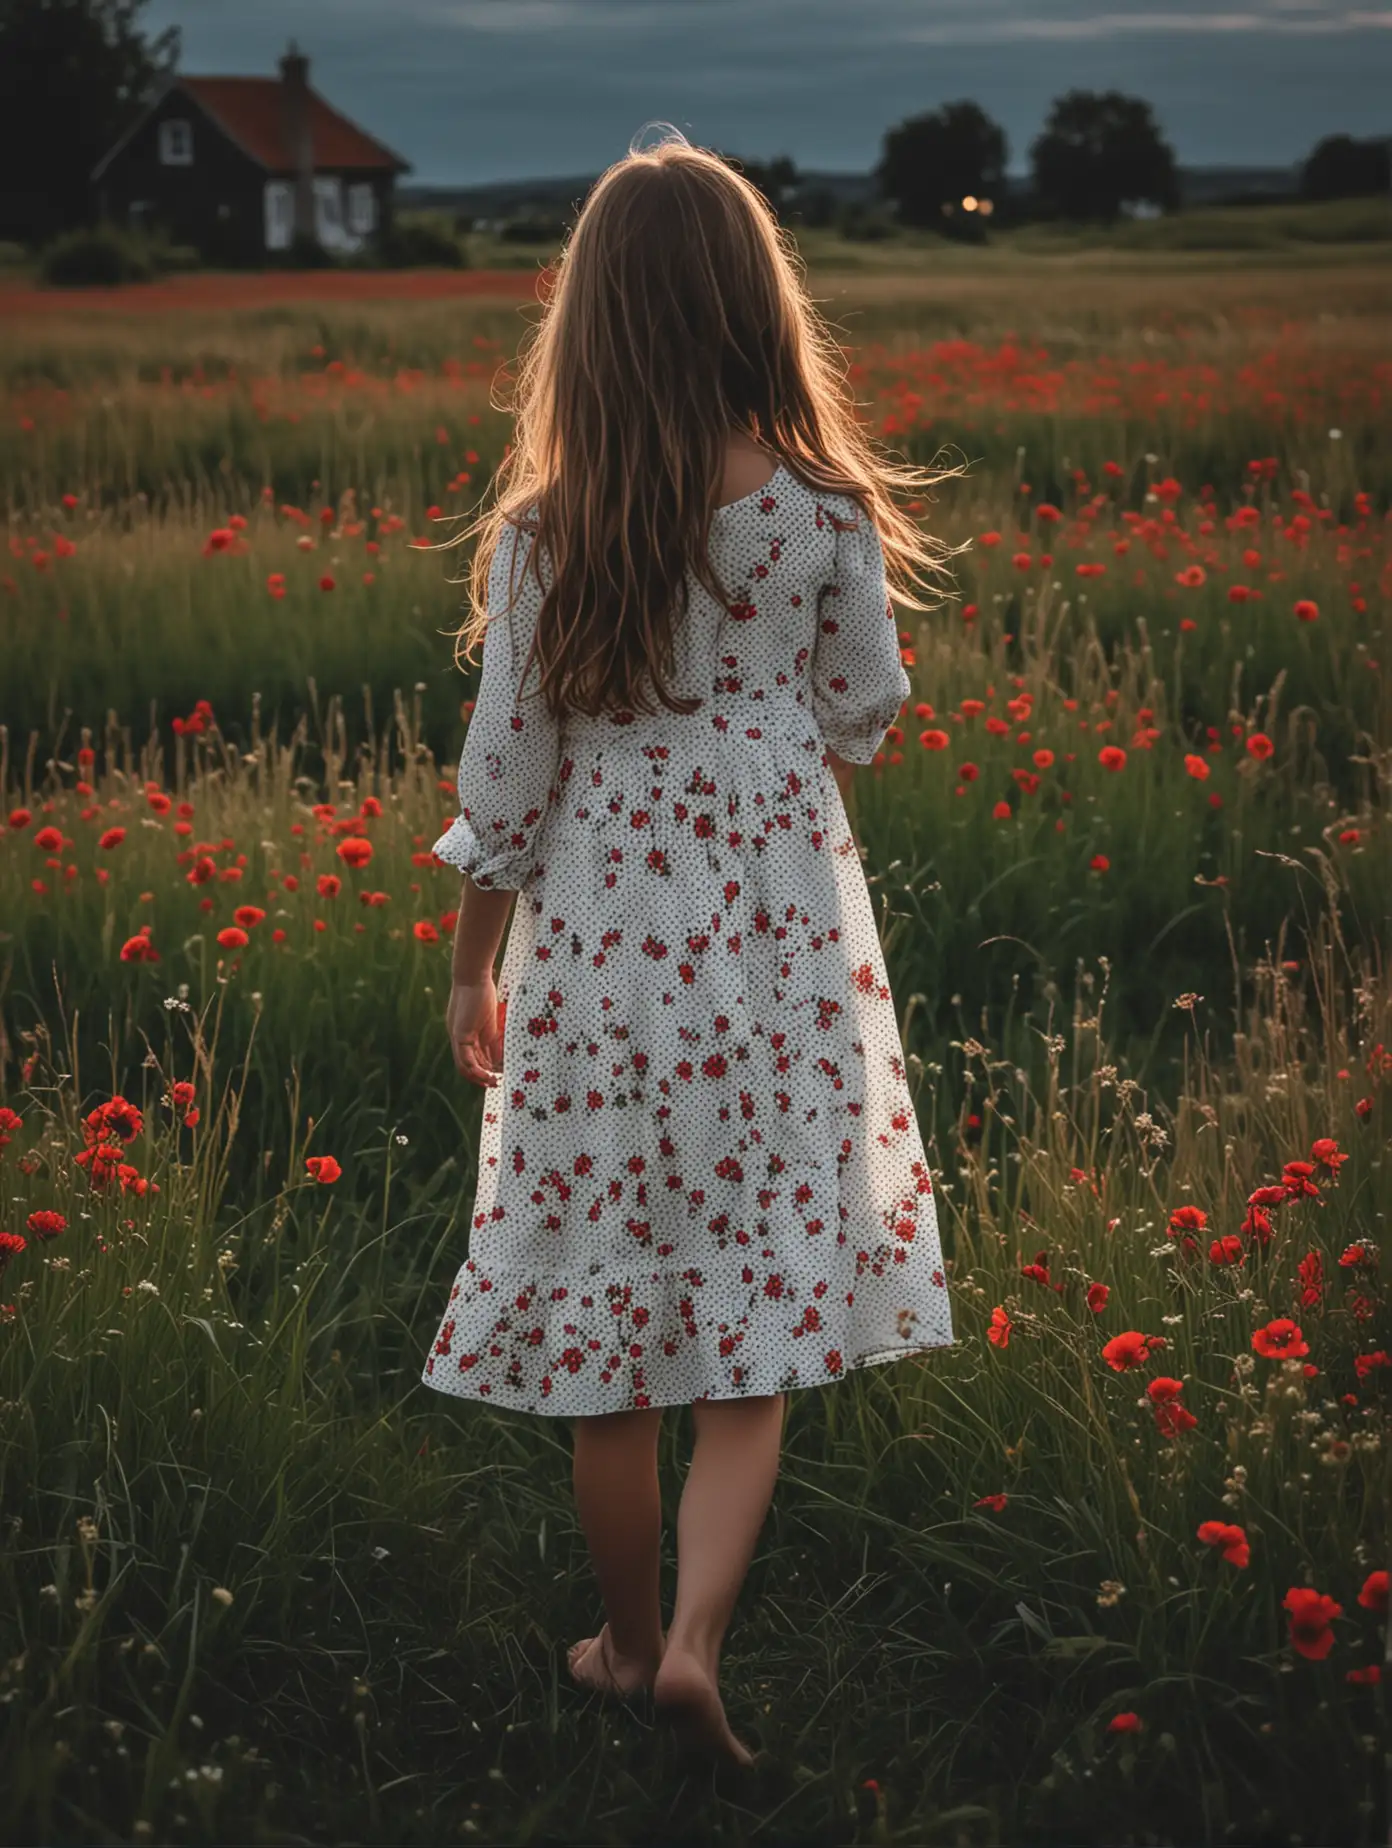 child long hair back white dot dress backlight night field meadow field red  flowers wind high grass cottage light stormy